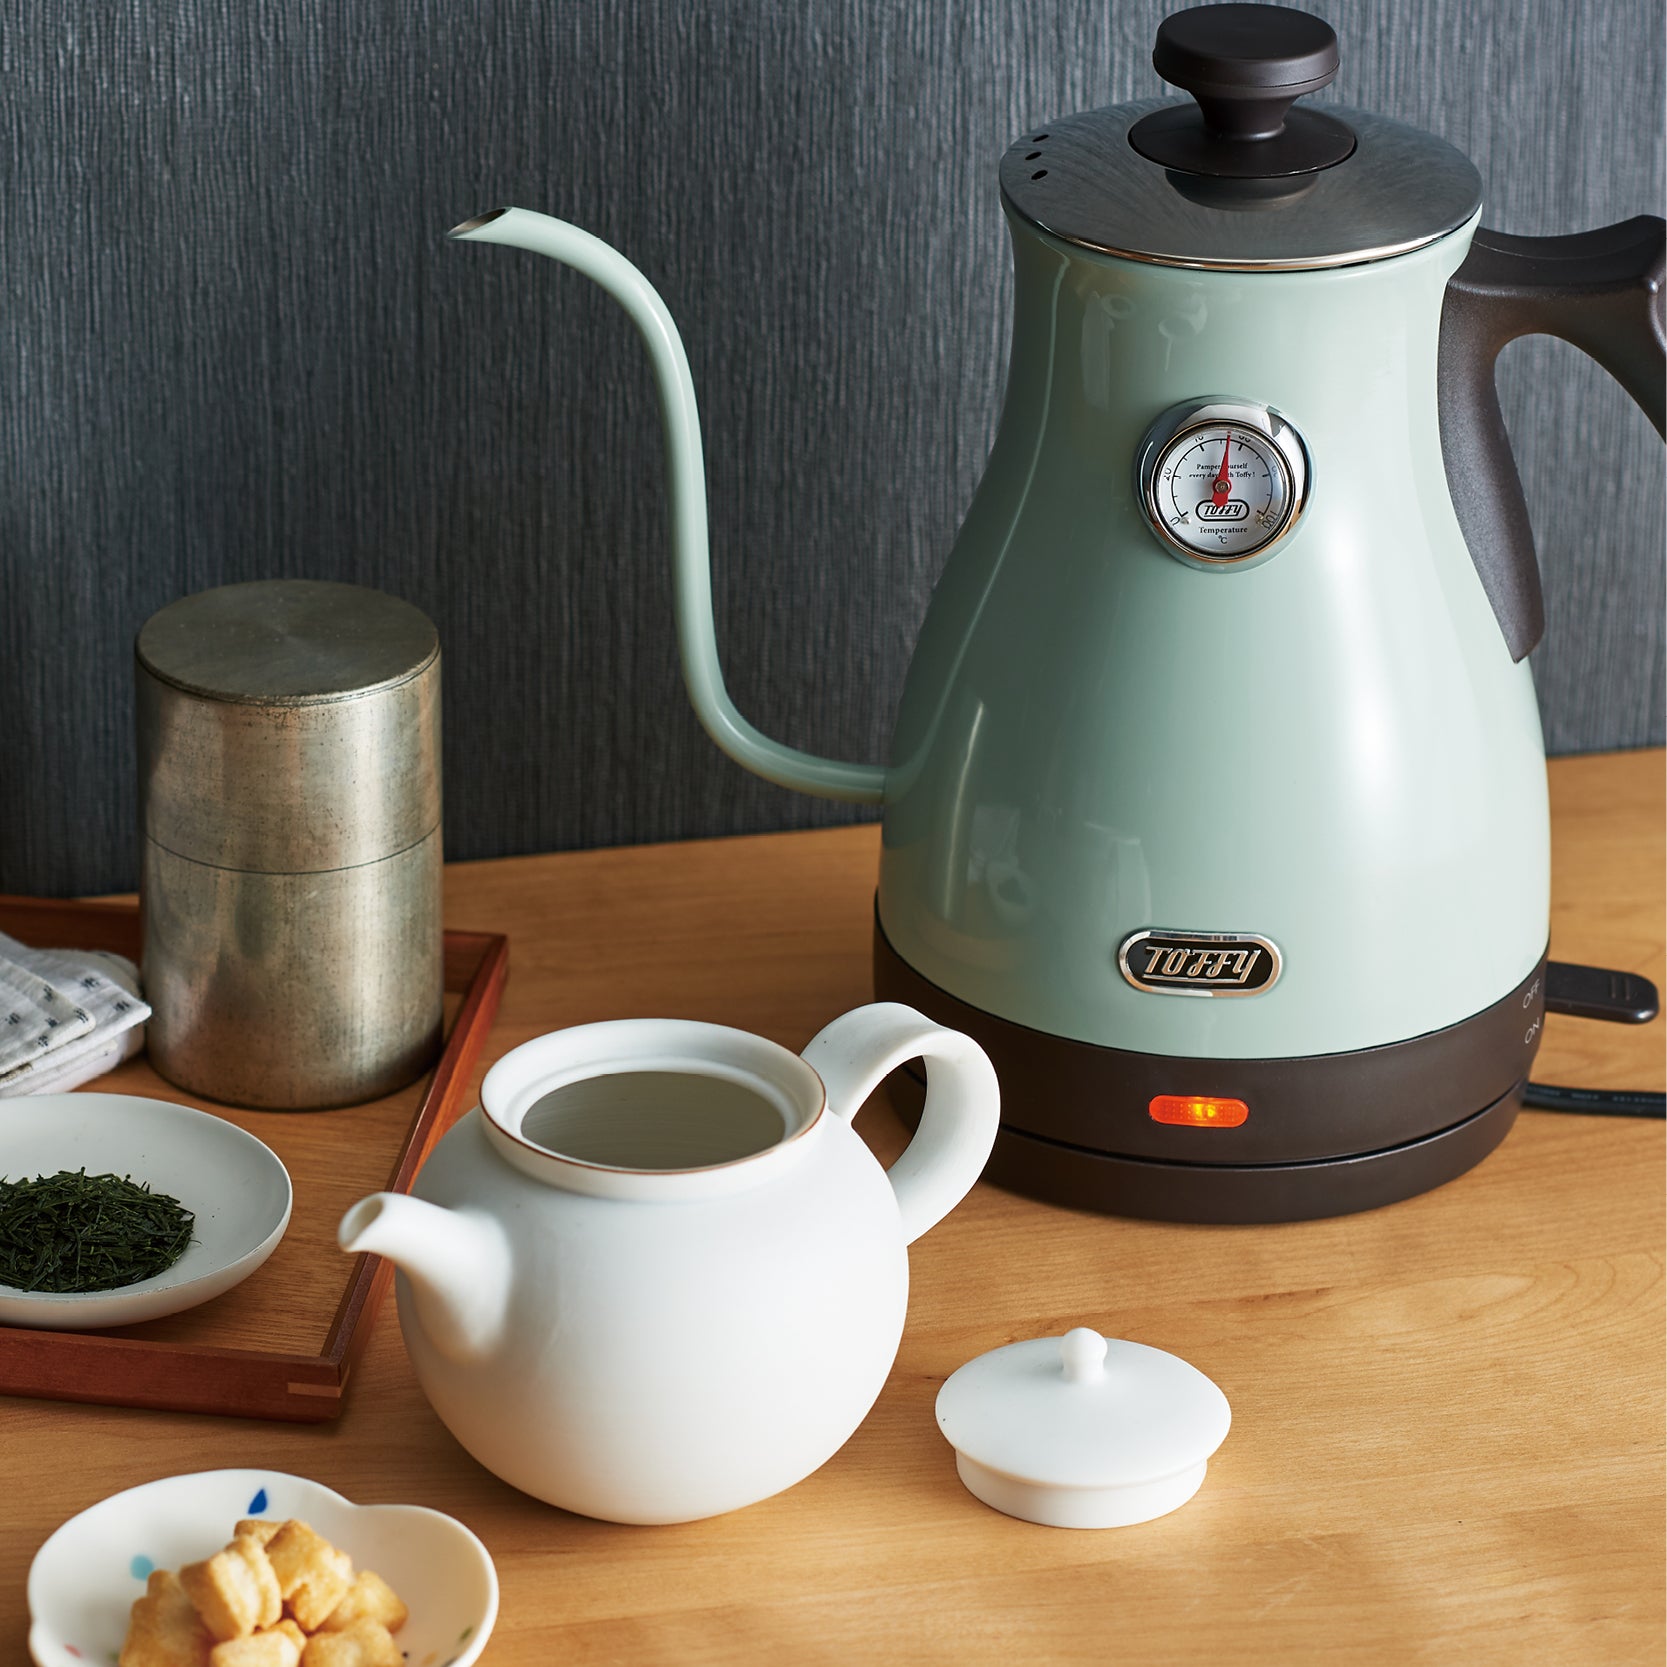 Toffy Electric Kettle with Thermometer 復古電熱水壼 K-KT3-PA